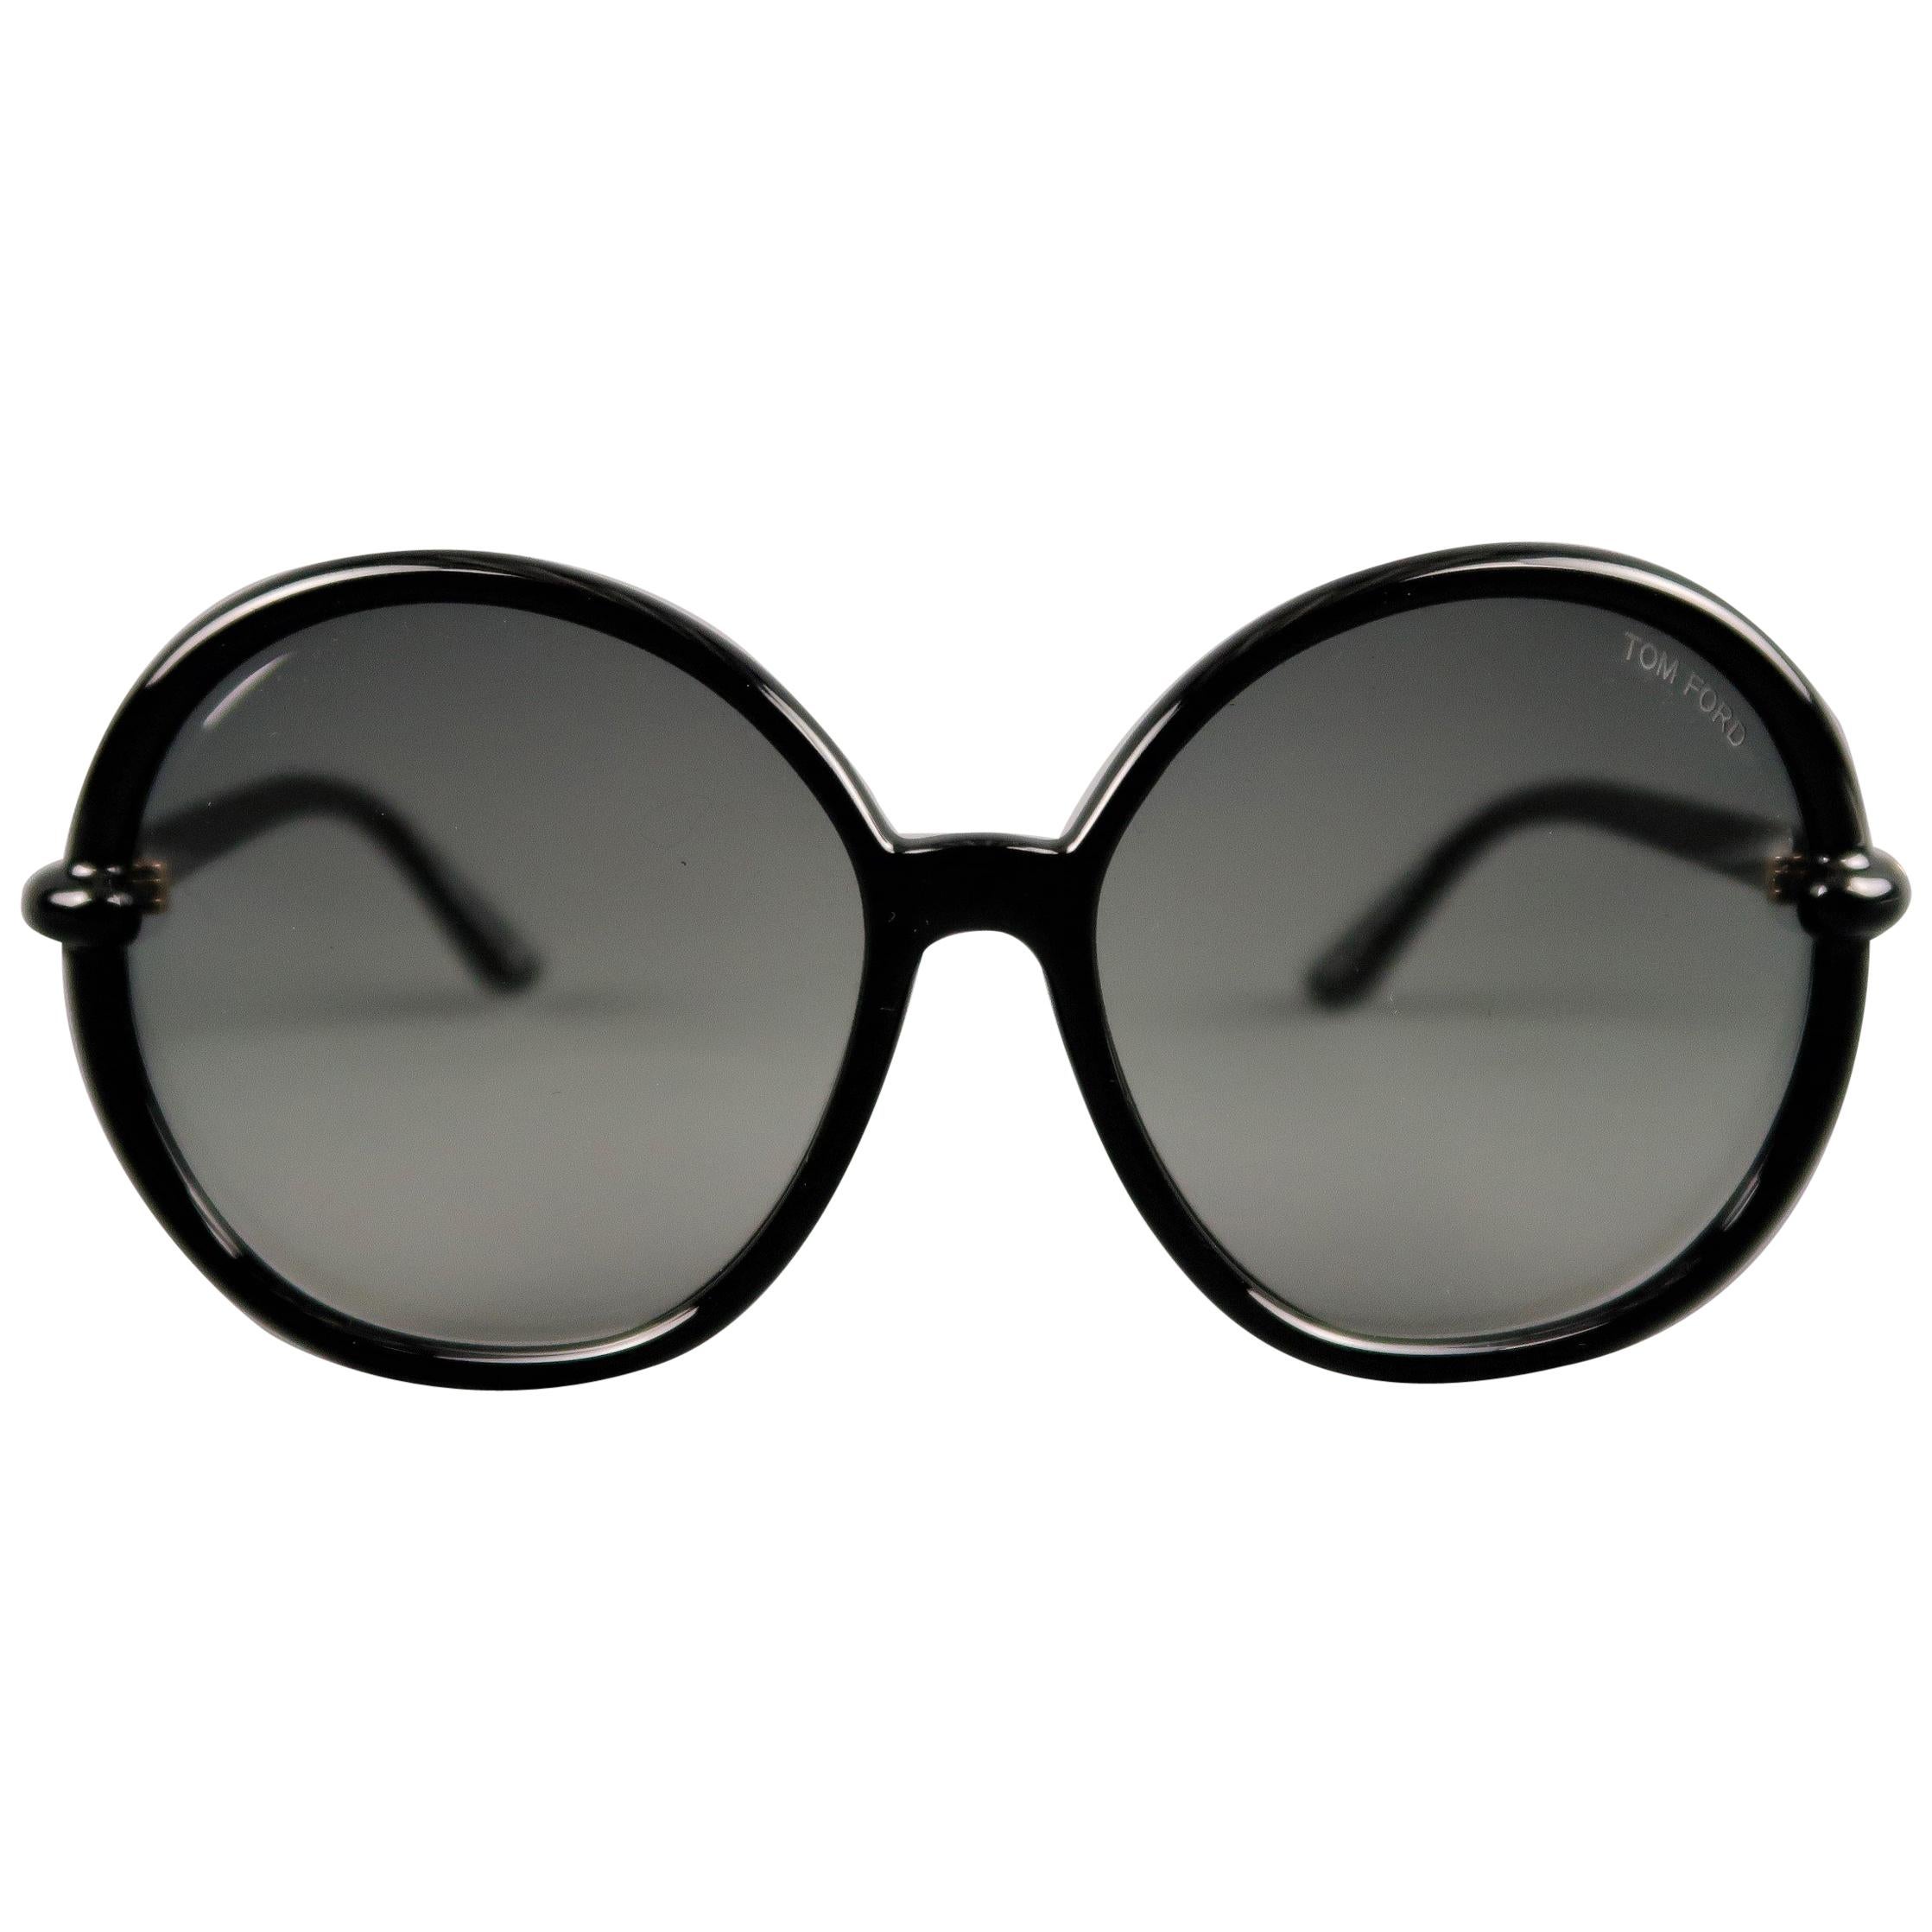 TOM FORD Black Round Ombre Lens CAITHLYN Sunglasses